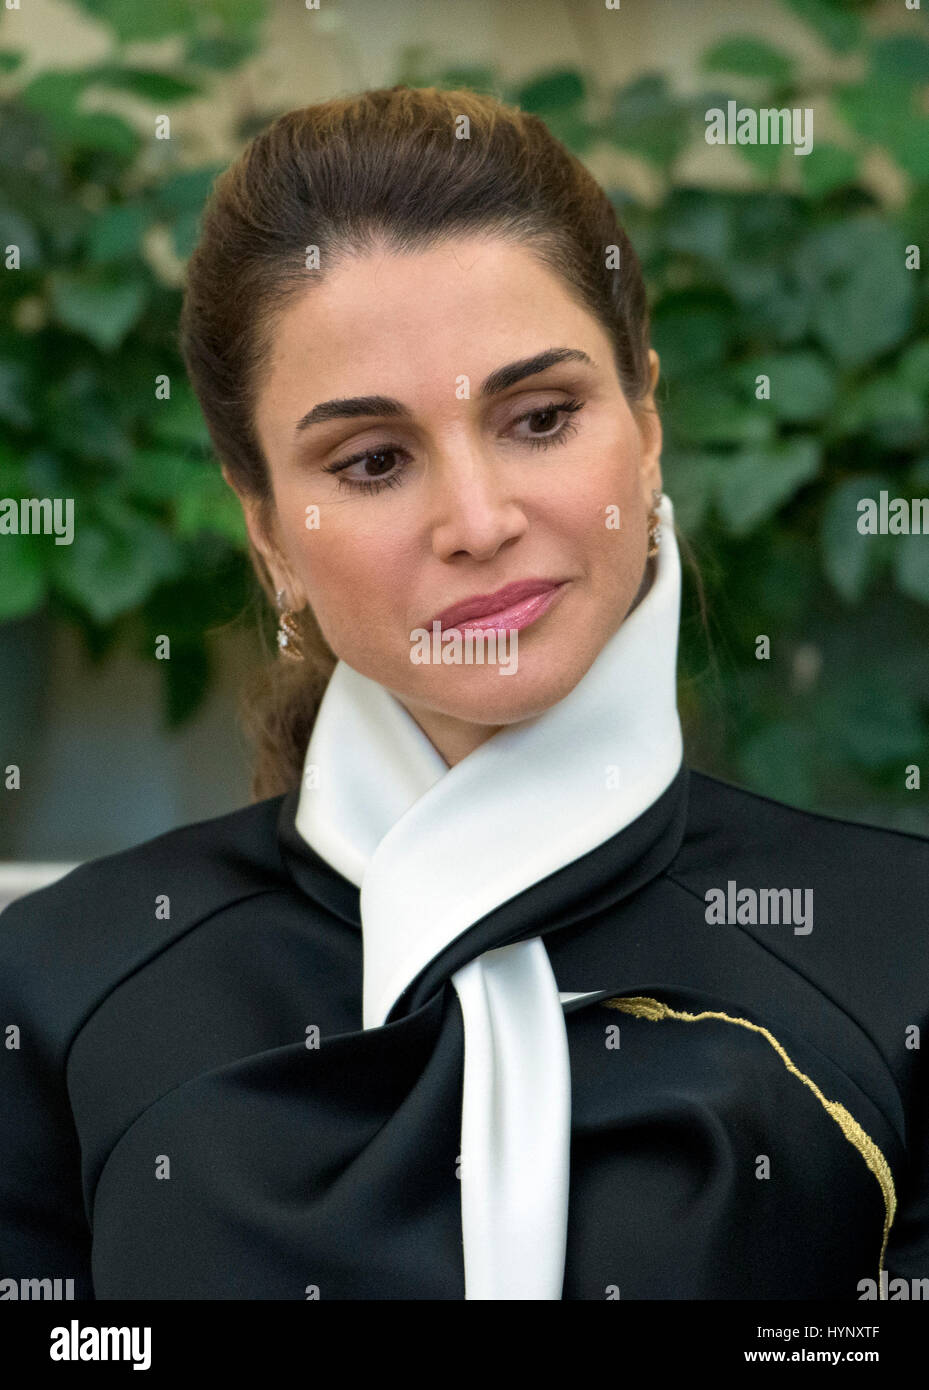 Washington, Us. 05th Apr, 2017. Queen Rania of Jordan looks on as United States President Donald J. Trump meets King Abdullah II of Jordan in the Oval Office of the White House in Washington, DC on Wednesday, April 5, 2017. Credit: Ron Sachs/Pool via CNP - NO WIRE SERVICE - Photo: Ron Sachs/Consolidated News Photos/Ron Sachs - Pool via CNP/dpa/Alamy Live News Stock Photo